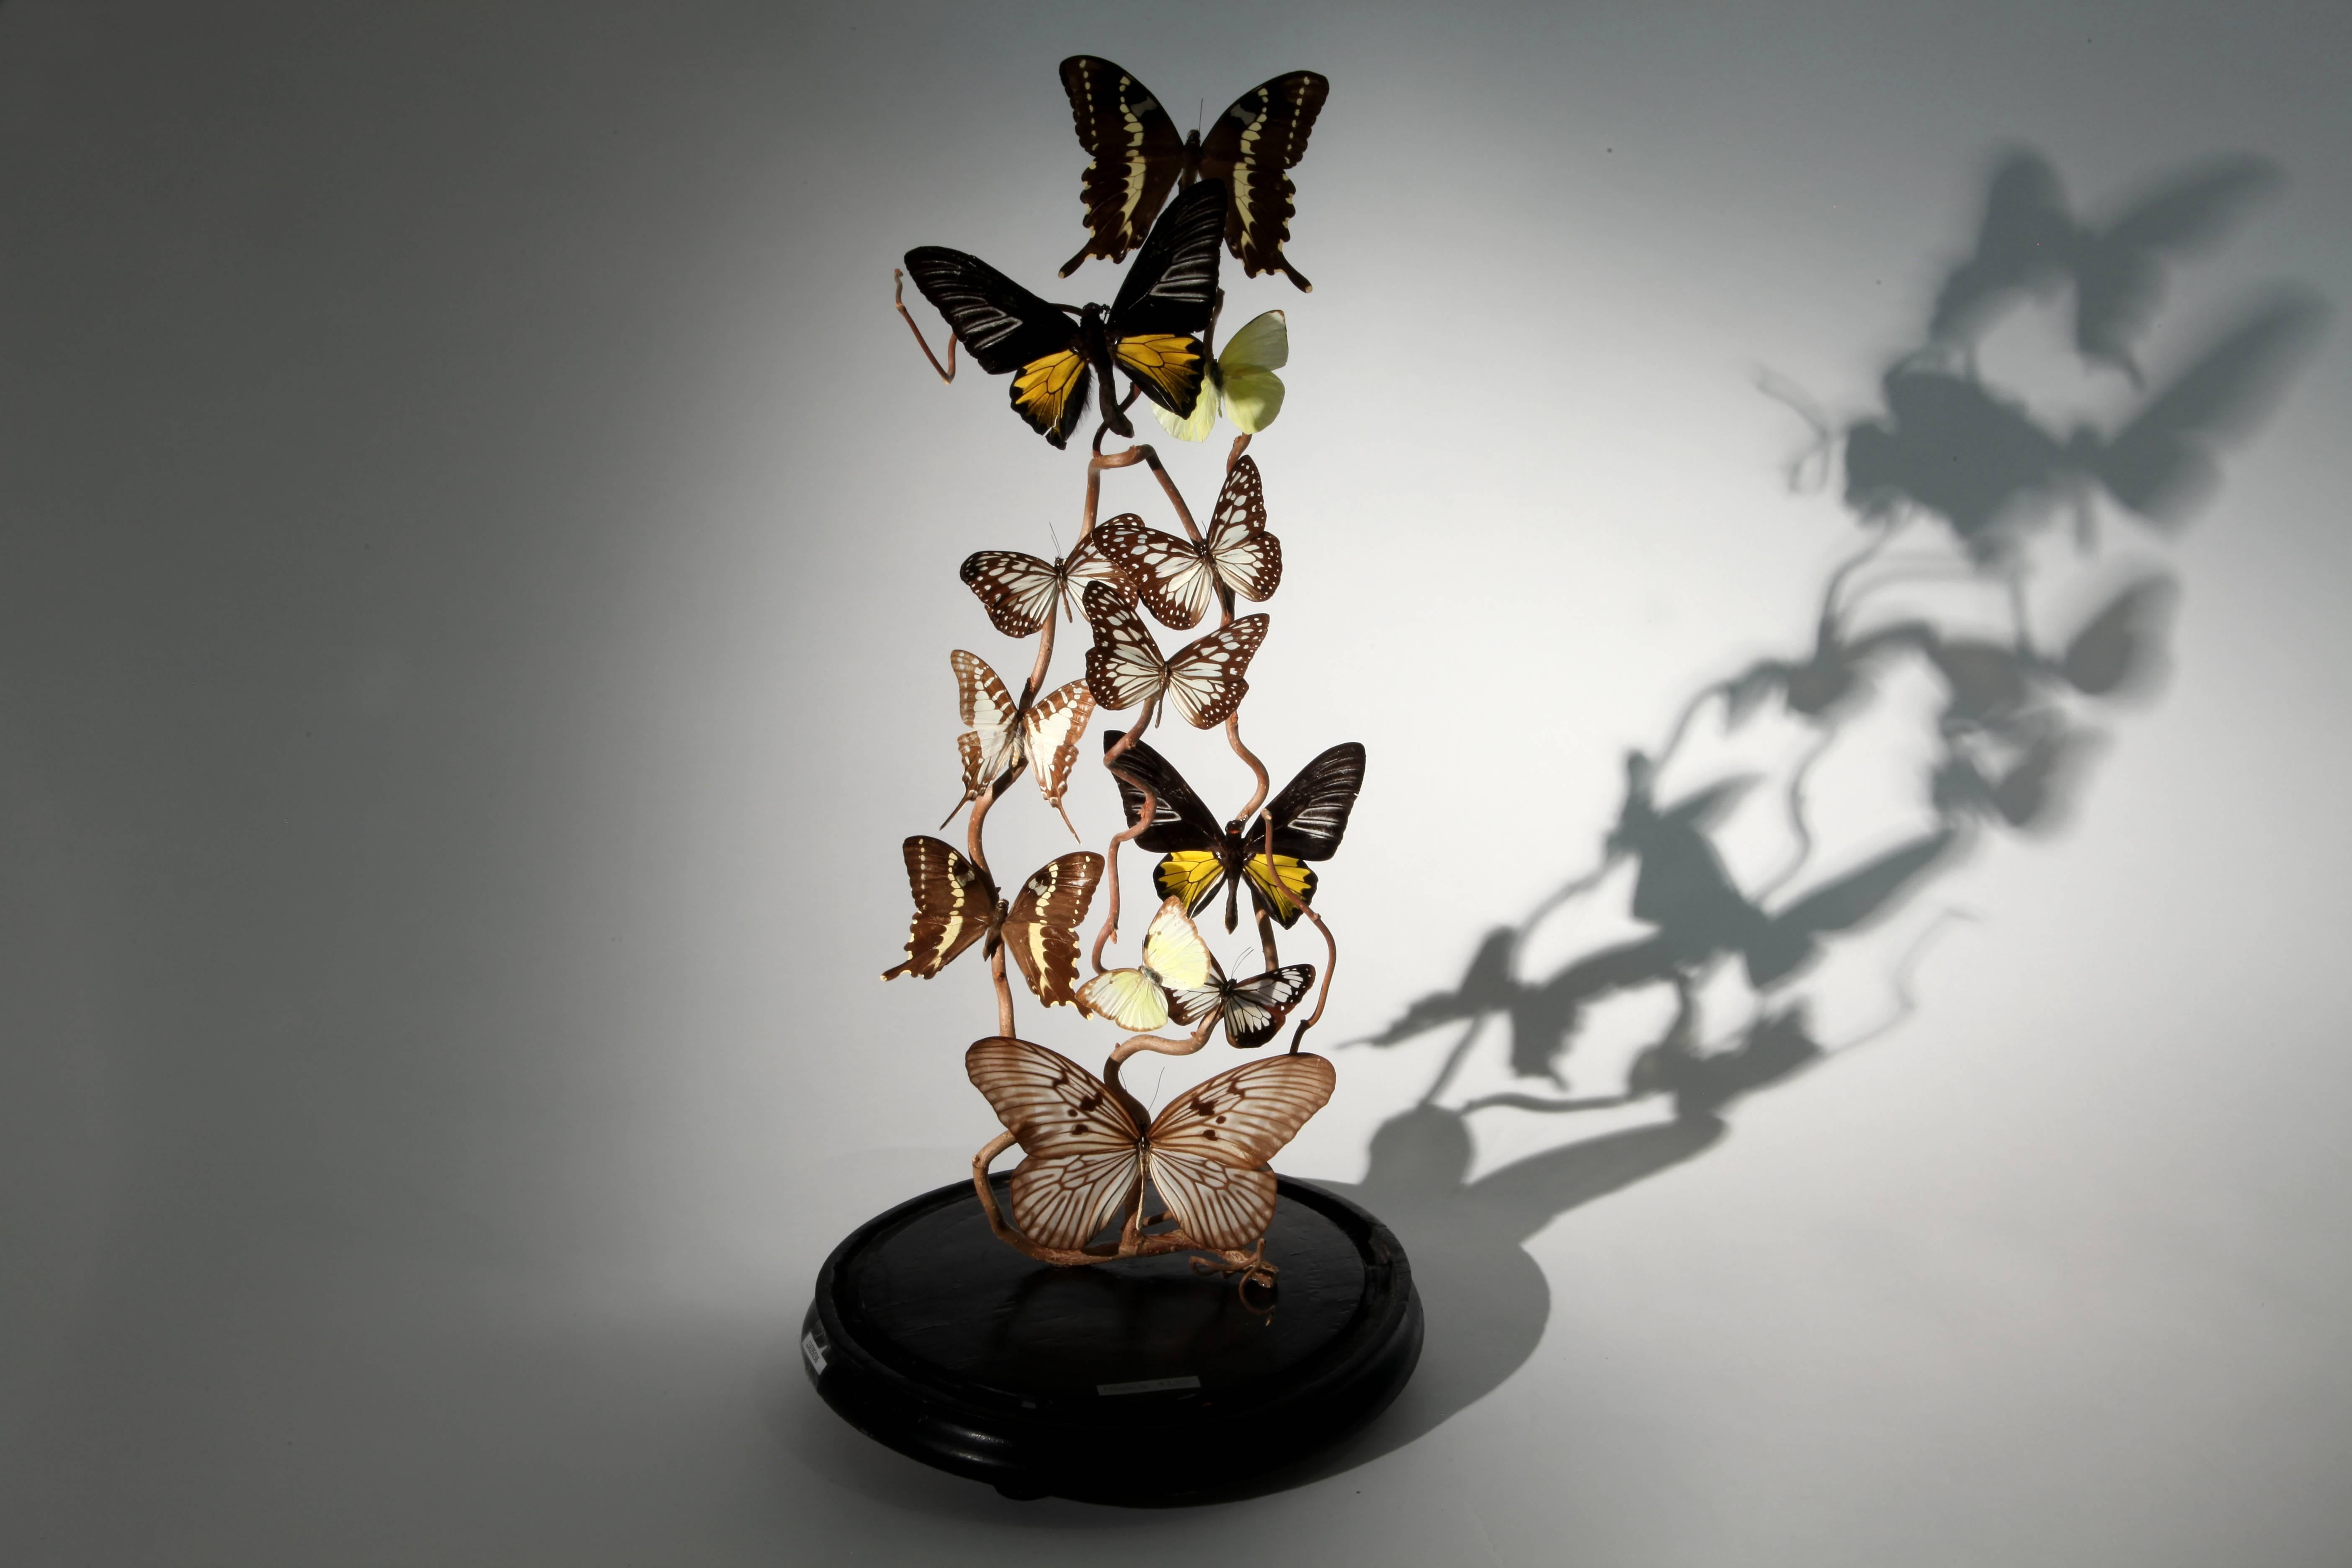 Add a unique and elegant burst of earth-toned colors to any room with this stunning butterfly dome. Extending up from the wood base, the specimens rest on twigs, preserved in a moment just before flight. These vivid butterfly composition is the